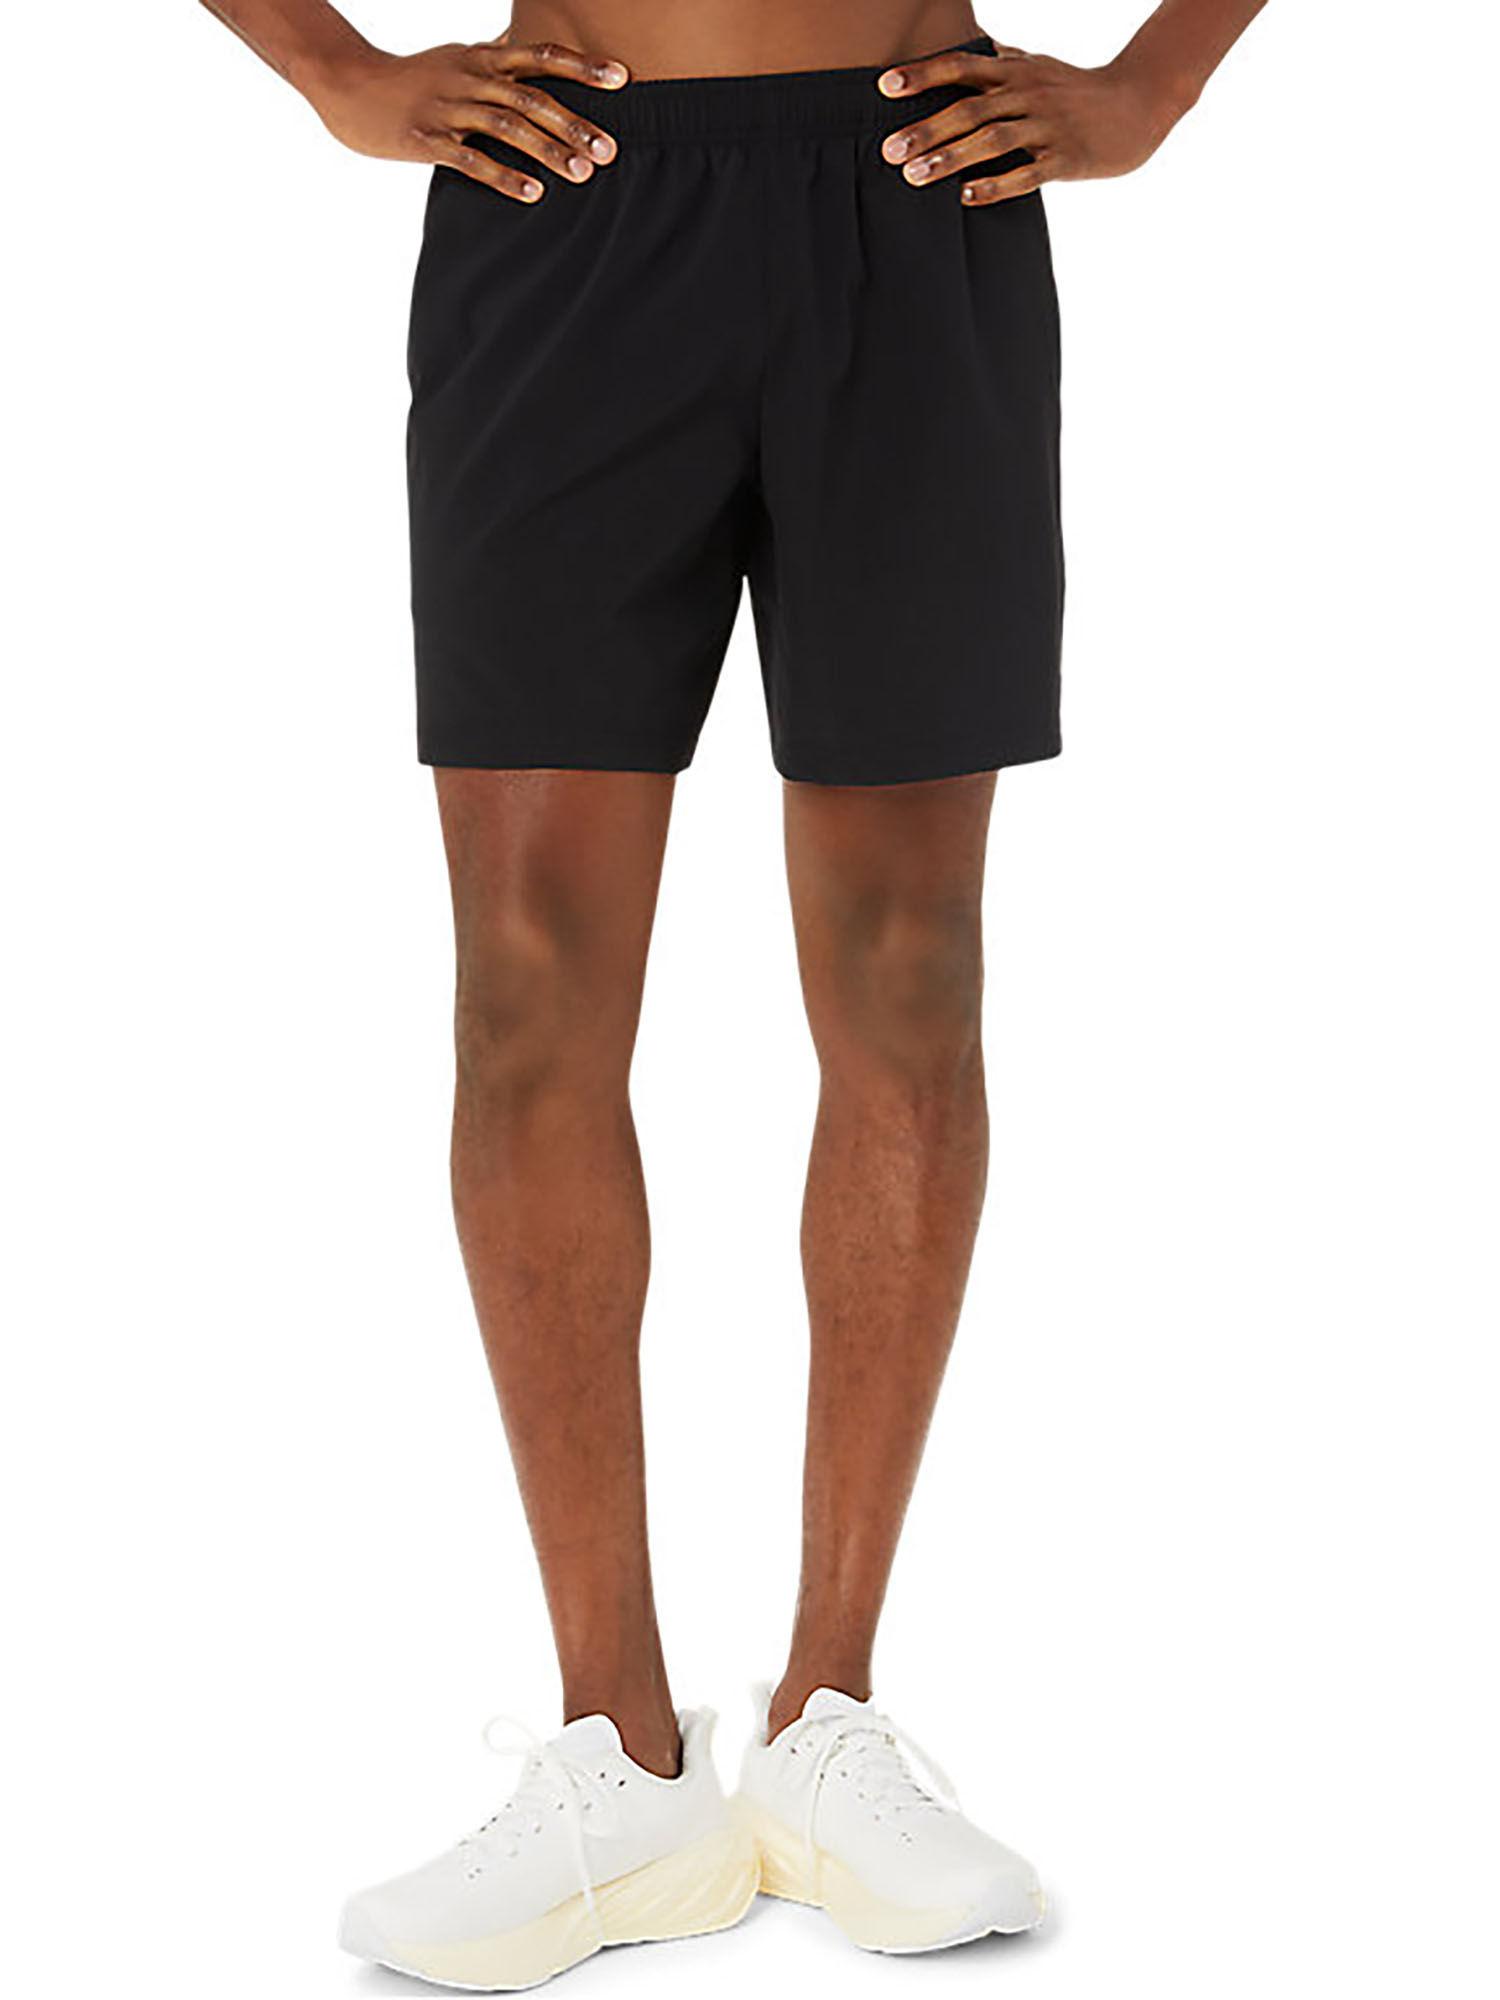 spiral embroidery 7in woven men black shorts